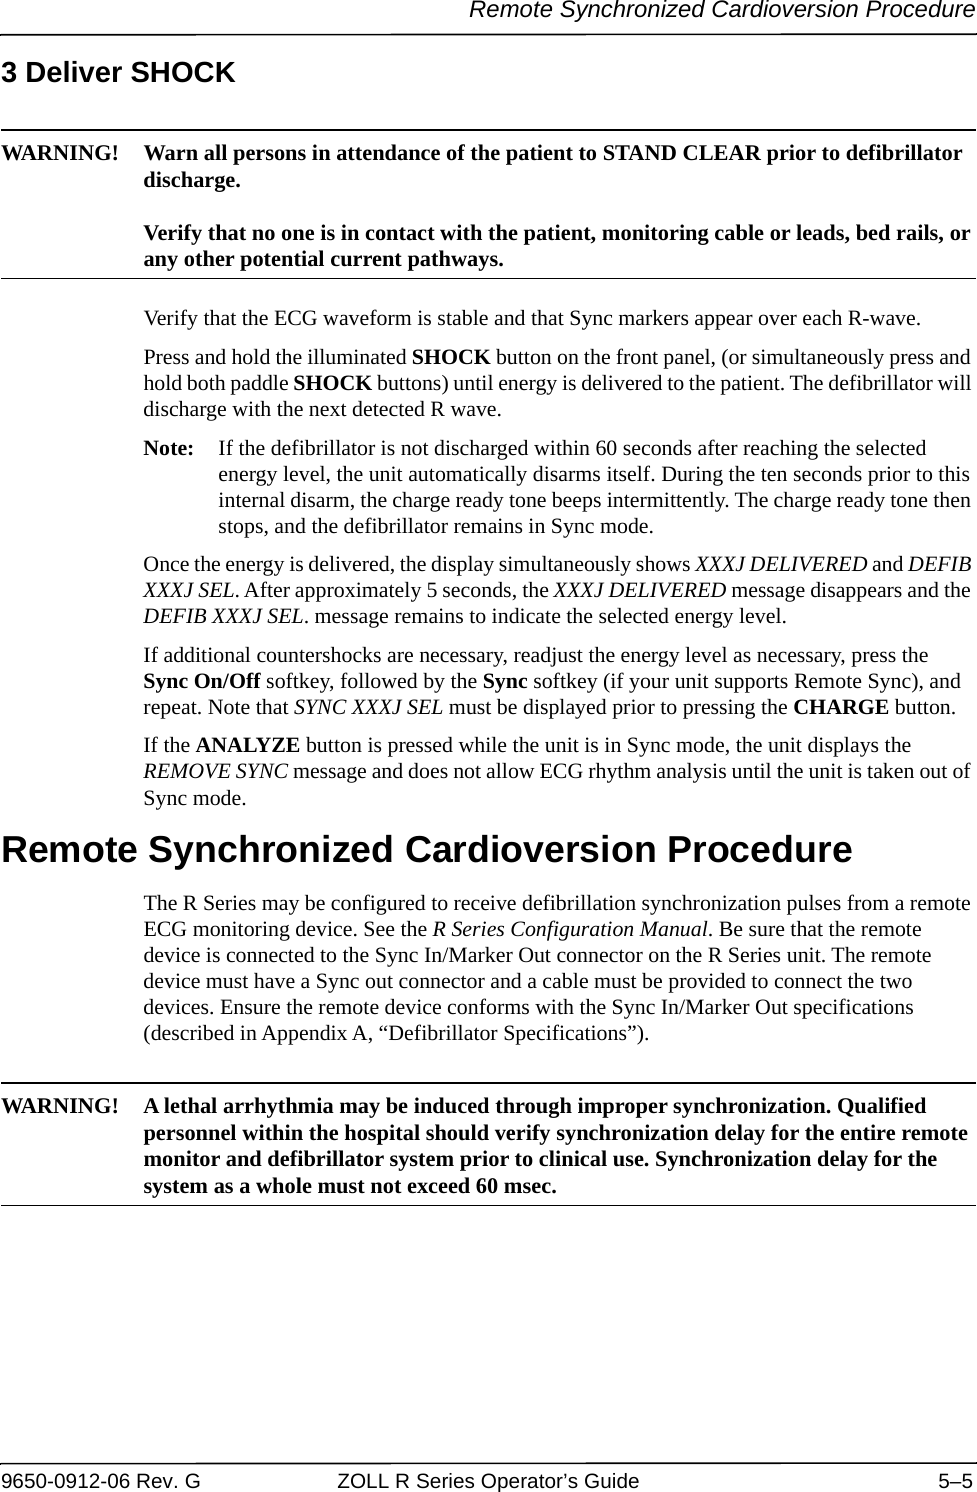 Remote Synchronized Cardioversion Procedure9650-0912-06 Rev. G ZOLL R Series Operator’s Guide 5–53 Deliver SHOCKWARNING! Warn all persons in attendance of the patient to STAND CLEAR prior to defibrillator discharge.Verify that no one is in contact with the patient, monitoring cable or leads, bed rails, or any other potential current pathways.Verify that the ECG waveform is stable and that Sync markers appear over each R-wave. Press and hold the illuminated SHOCK button on the front panel, (or simultaneously press and hold both paddle SHOCK buttons) until energy is delivered to the patient. The defibrillator will discharge with the next detected R wave.Note: If the defibrillator is not discharged within 60 seconds after reaching the selected energy level, the unit automatically disarms itself. During the ten seconds prior to this internal disarm, the charge ready tone beeps intermittently. The charge ready tone then stops, and the defibrillator remains in Sync mode. Once the energy is delivered, the display simultaneously shows XXXJ DELIVERED and DEFIB XXXJ SEL. After approximately 5 seconds, the XXXJ DELIVERED message disappears and the DEFIB XXXJ SEL. message remains to indicate the selected energy level.If additional countershocks are necessary, readjust the energy level as necessary, press the Sync On/Off softkey, followed by the Sync softkey (if your unit supports Remote Sync), and repeat. Note that SYNC XXXJ SEL must be displayed prior to pressing the CHARGE button. If the ANALYZE button is pressed while the unit is in Sync mode, the unit displays the REMOVE SYNC message and does not allow ECG rhythm analysis until the unit is taken out of Sync mode. Remote Synchronized Cardioversion ProcedureThe R Series may be configured to receive defibrillation synchronization pulses from a remote ECG monitoring device. See the R Series Configuration Manual. Be sure that the remote device is connected to the Sync In/Marker Out connector on the R Series unit. The remote device must have a Sync out connector and a cable must be provided to connect the two devices. Ensure the remote device conforms with the Sync In/Marker Out specifications (described in Appendix A, “Defibrillator Specifications”).WARNING! A lethal arrhythmia may be induced through improper synchronization. Qualified personnel within the hospital should verify synchronization delay for the entire remote monitor and defibrillator system prior to clinical use. Synchronization delay for the system as a whole must not exceed 60 msec.